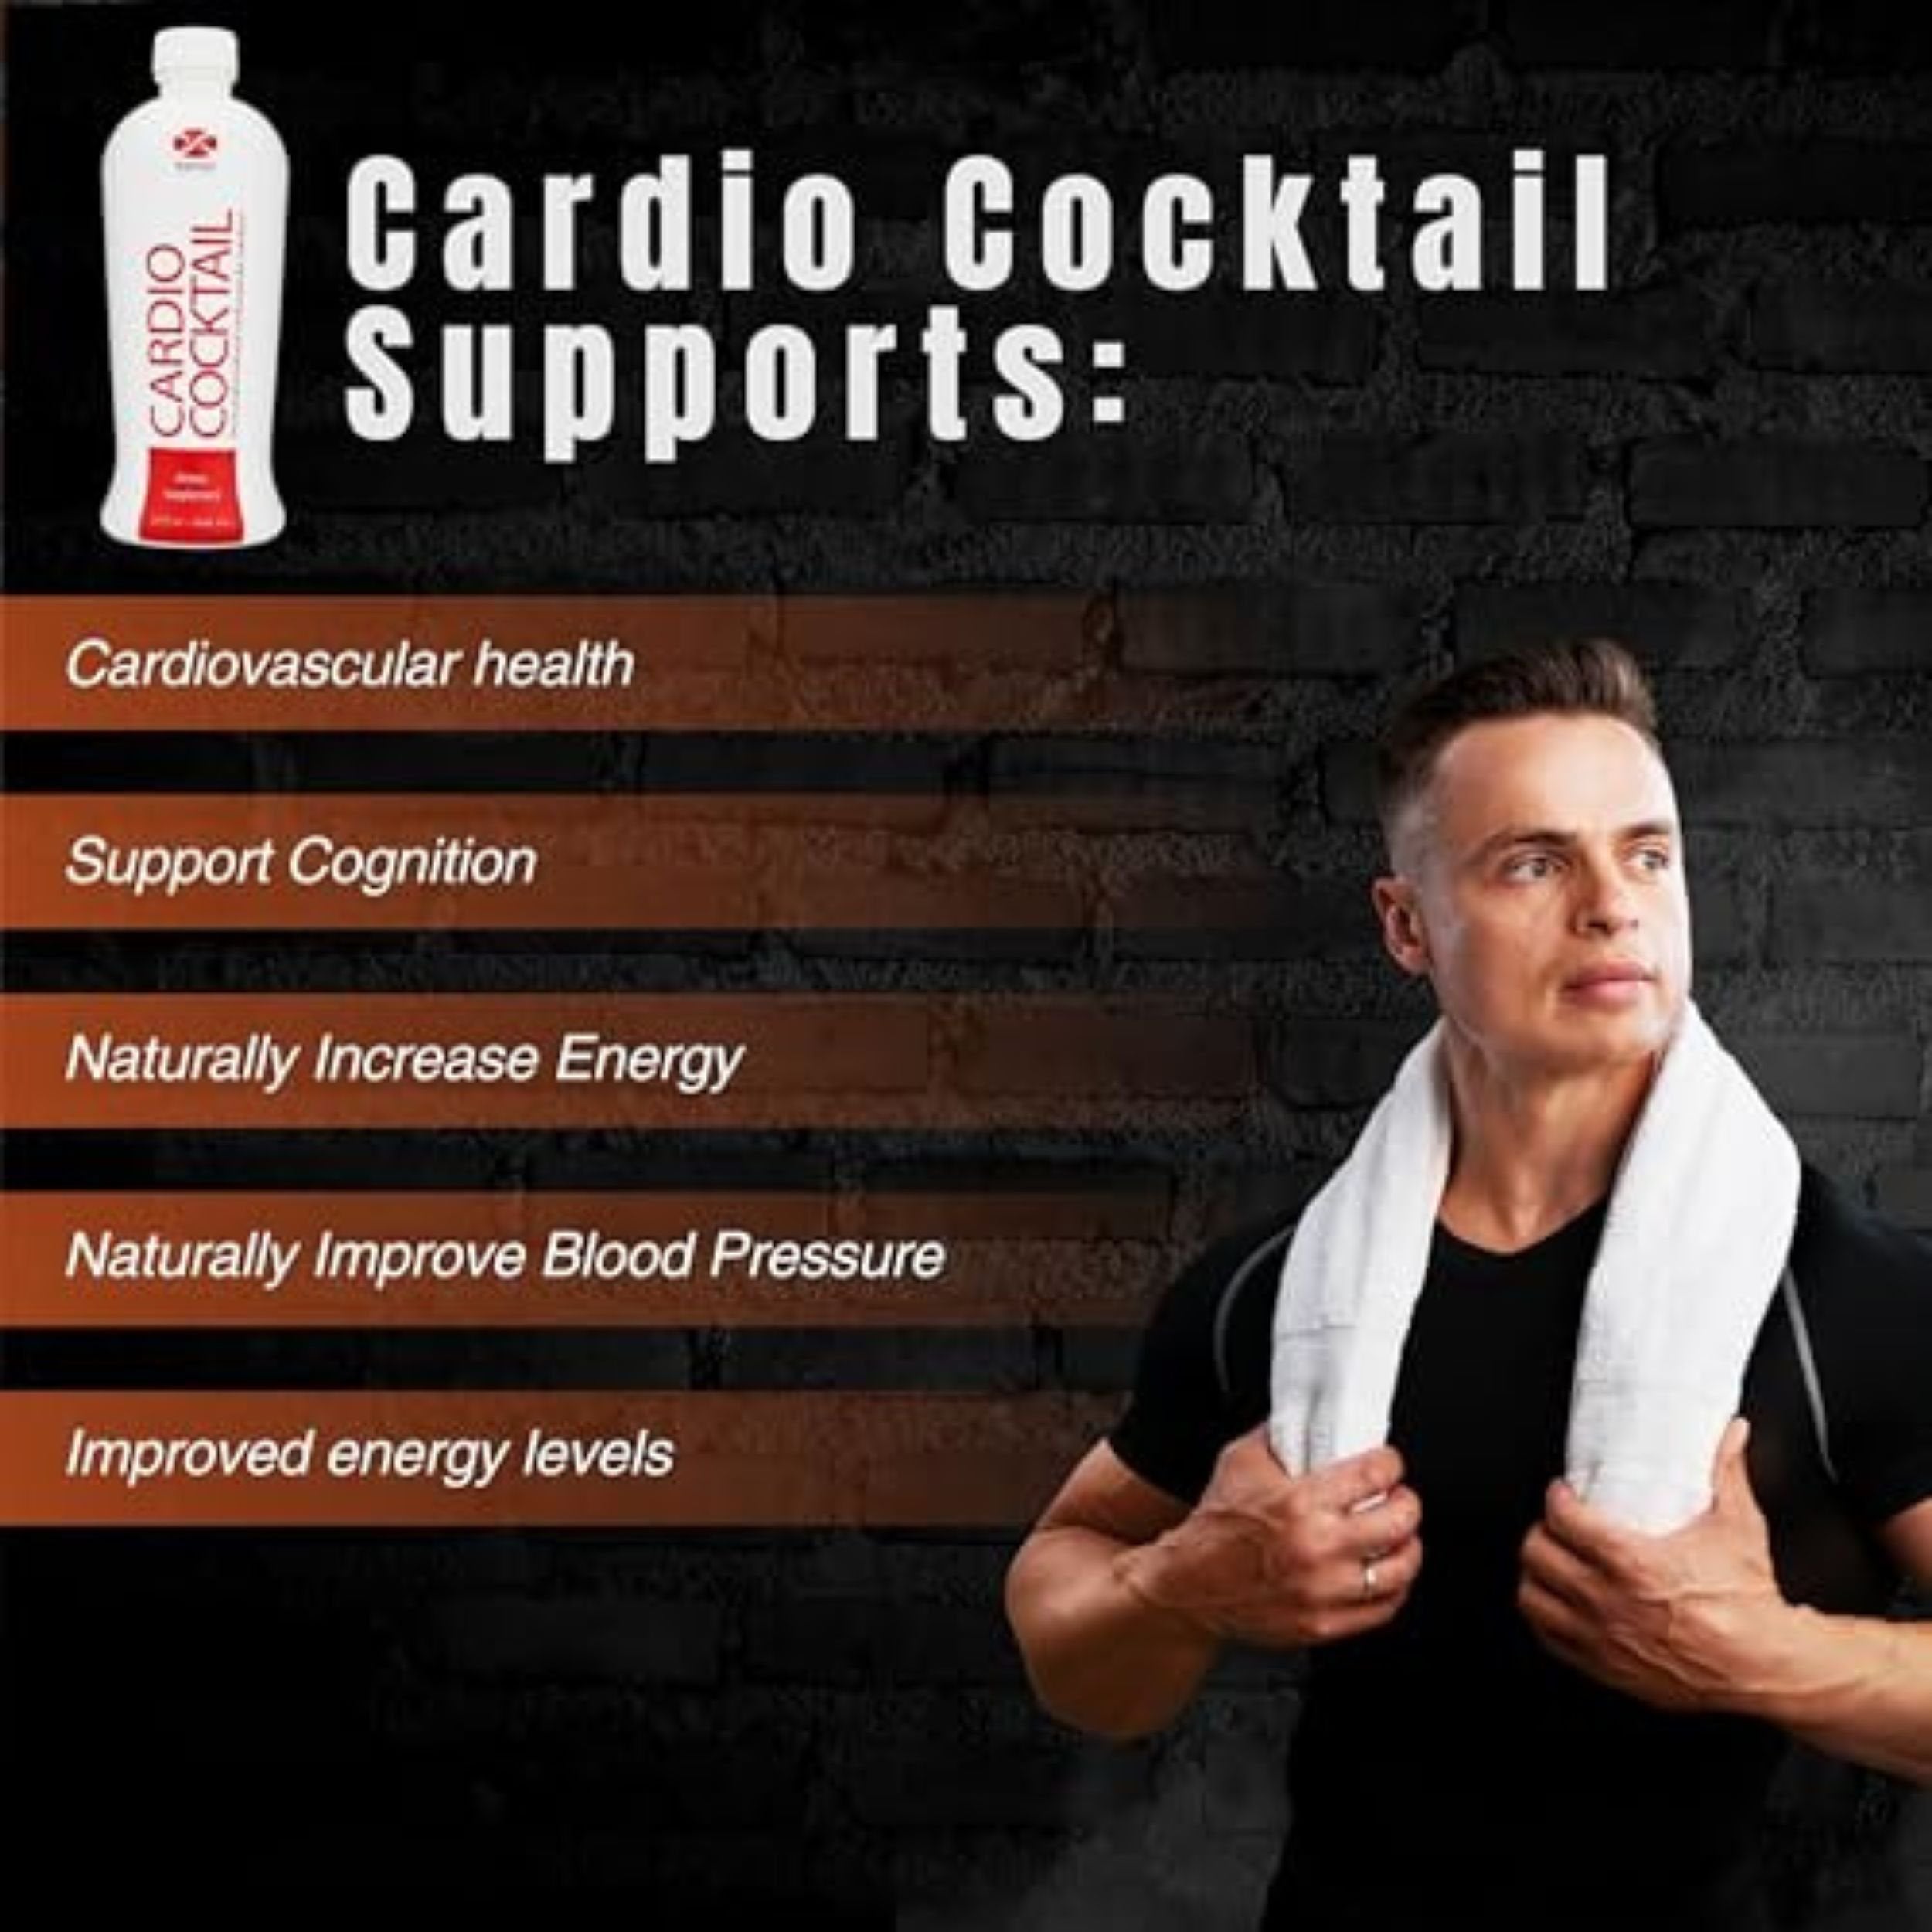 Worldwide Nutrition Bundle, 2 Items: Formor Cardio Cocktail Nitric Oxide Booster with L Arginine L Citrulline Supplement - 2 Count, 32 Oz Blood Pressure Supplements and Multi-Purpose Key Chain